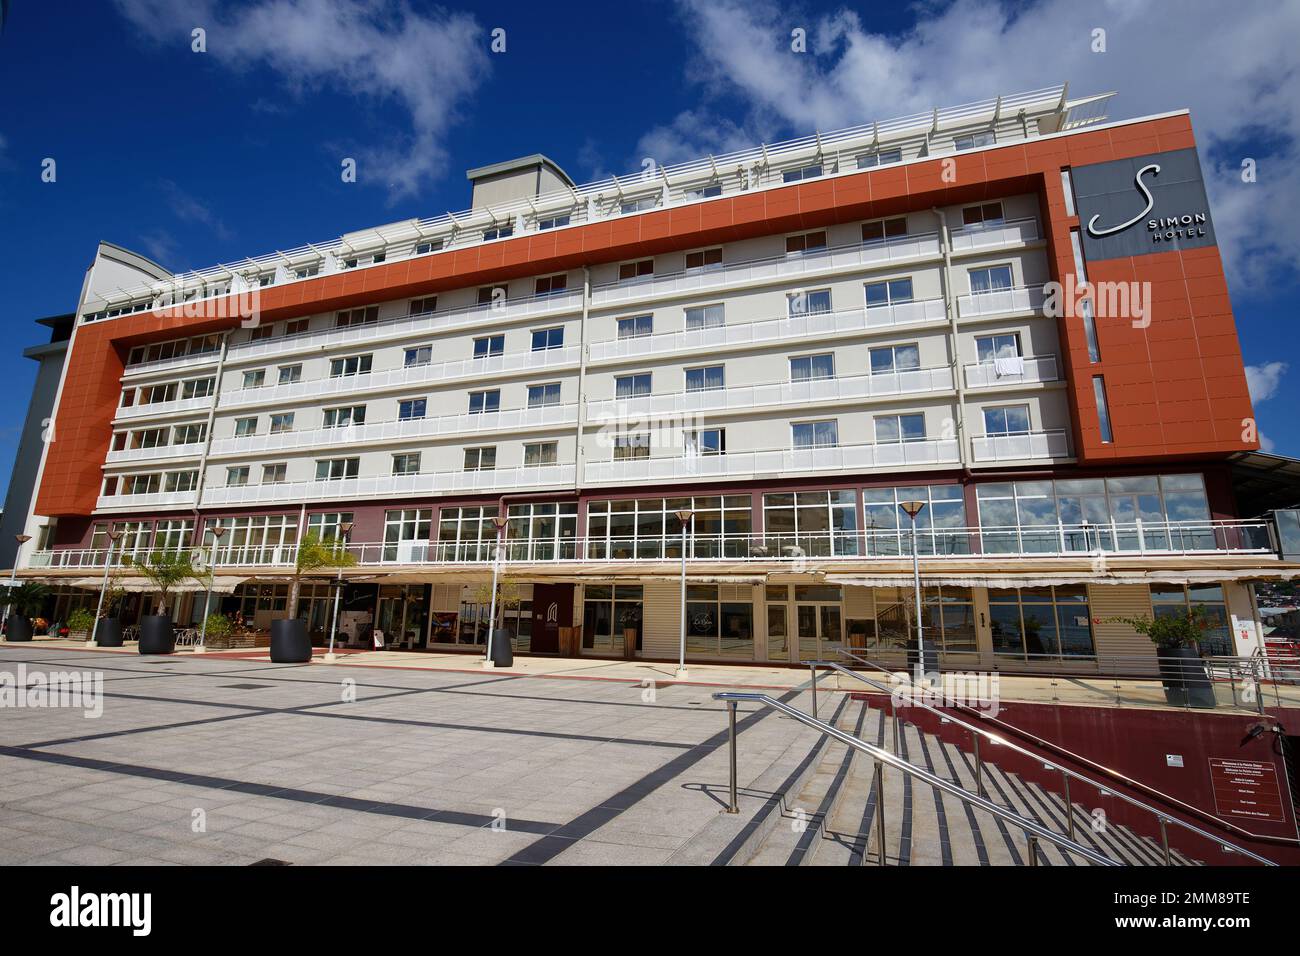 View of Simon Hotel on the waterfront of the capital city of Fort-de-France. Martinique island. Stock Photo